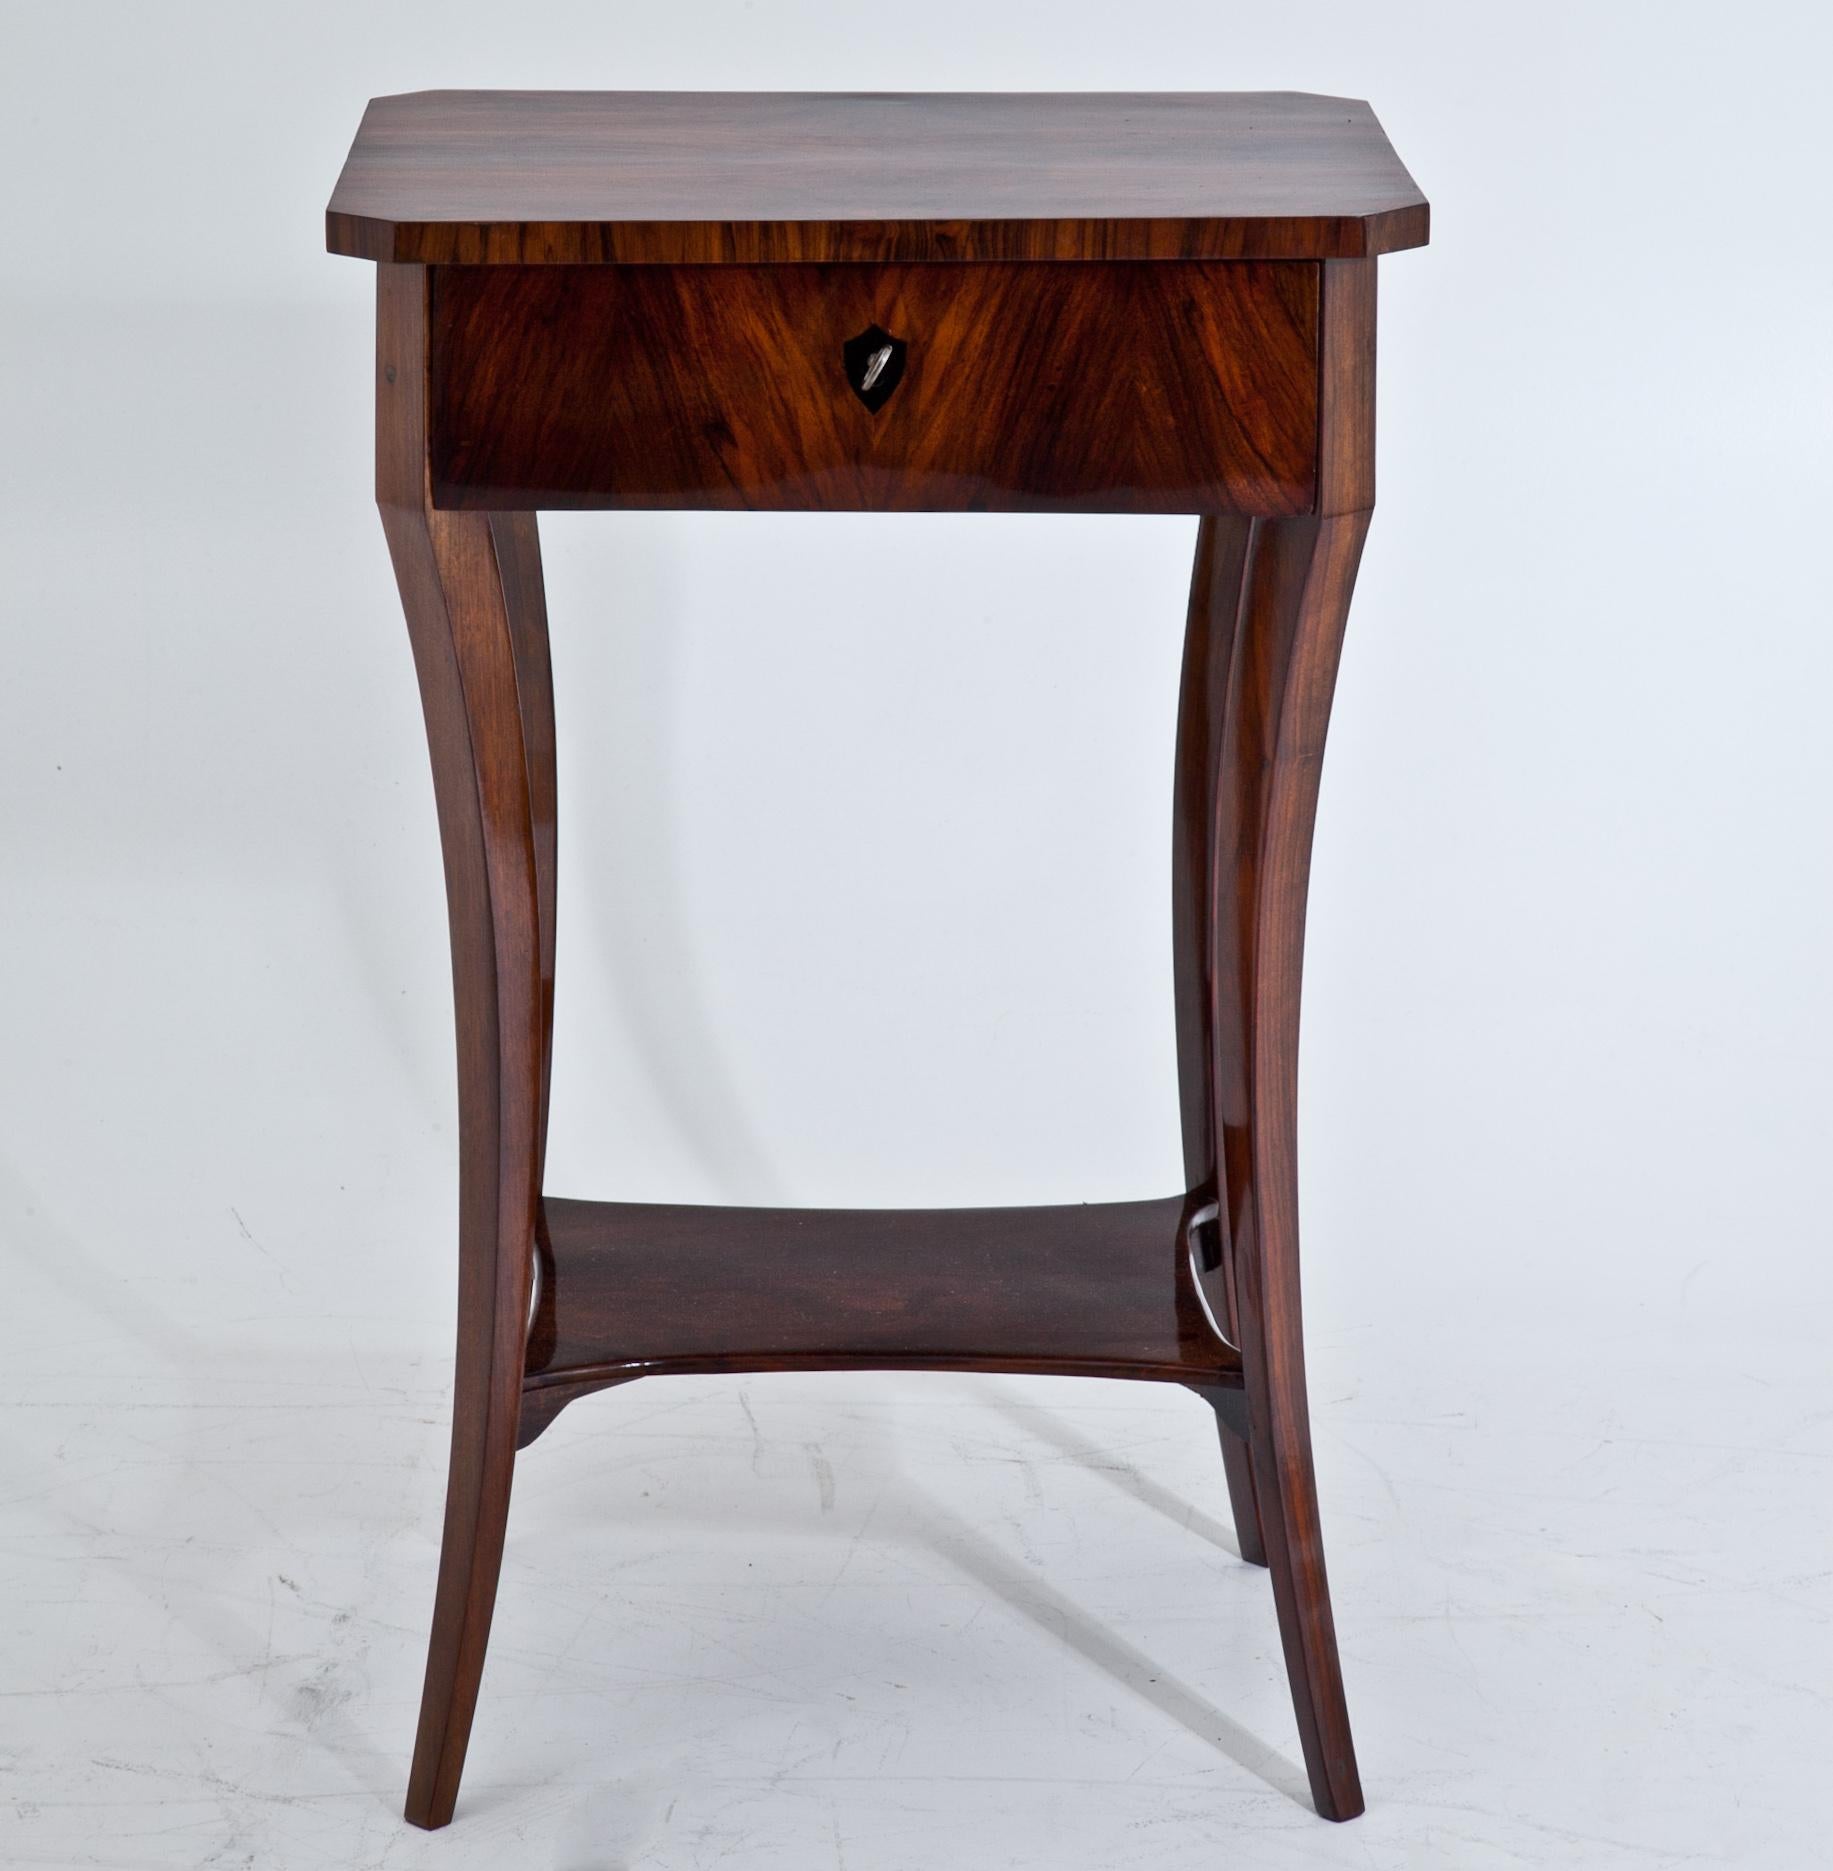 Biedermeier side table standing on slender, slightly curved legs with a concave shelf between them. Above is one drawer with an ebonized escutcheon and slanted corners. Very beautiful walnut veneer. Beautiful hand-polished condition.